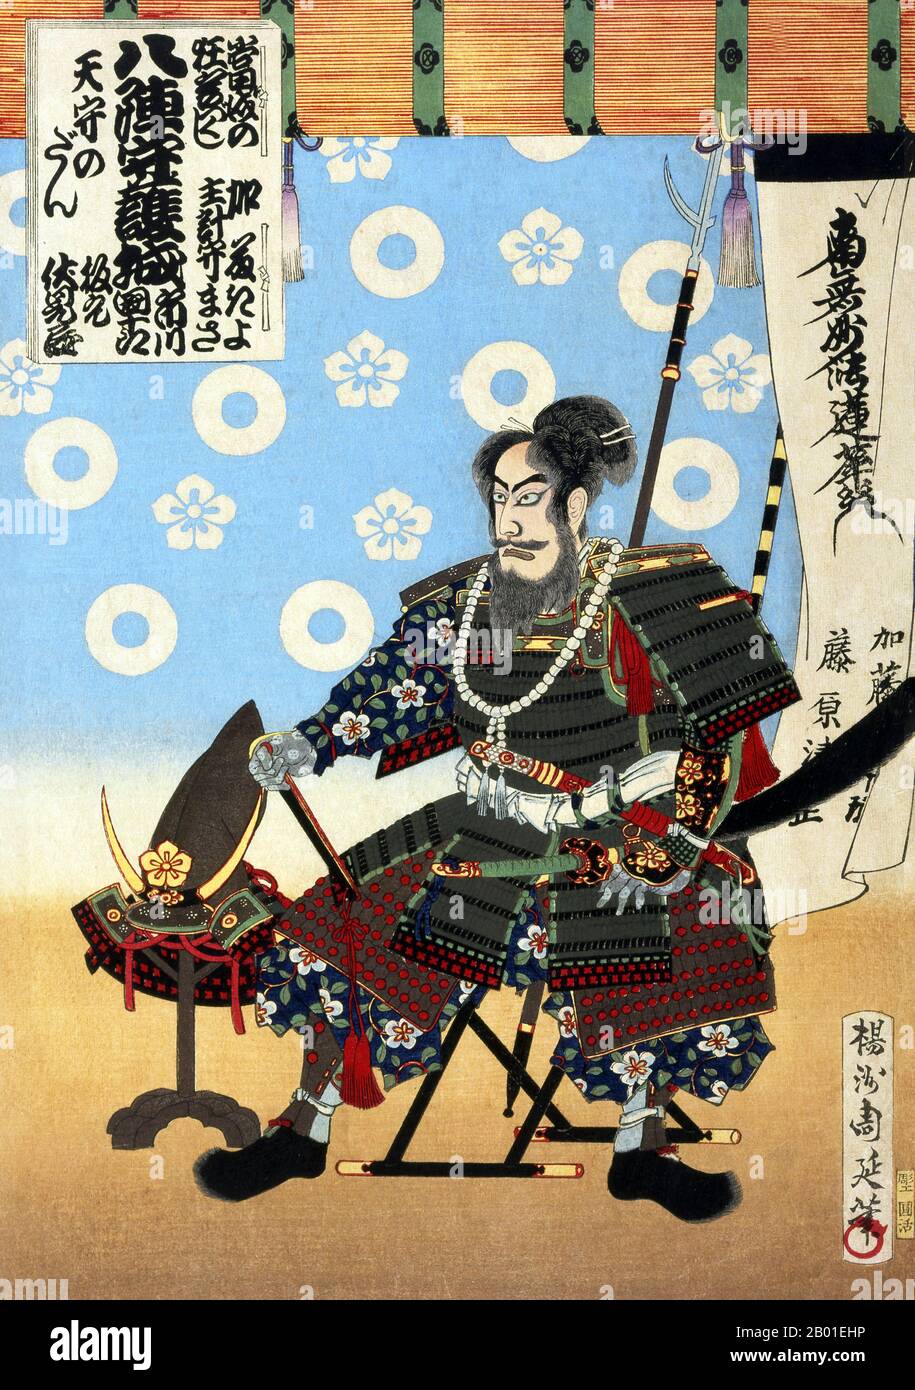 Japan: The warrior Kato Kiyomasa (1562-1611). Ukiyo-e woodblock print by Yoshu Chikanobu (1838-1912), 1886.  The alleged poisoning of the great warrior Kato Kiyomasa was the subject of a kabuki play that premiered in 1807, but due to government censorship at the time, the main character's name was changed to Sato Masakiyo.  Toyohara Chikanobu, better known to his contemporaries as Yōshū Chikanobu, was a prolific woodblock artist of Japan's Meiji period. His works capture the transition from the age of the samurai to Meiji modernity. Stock Photo